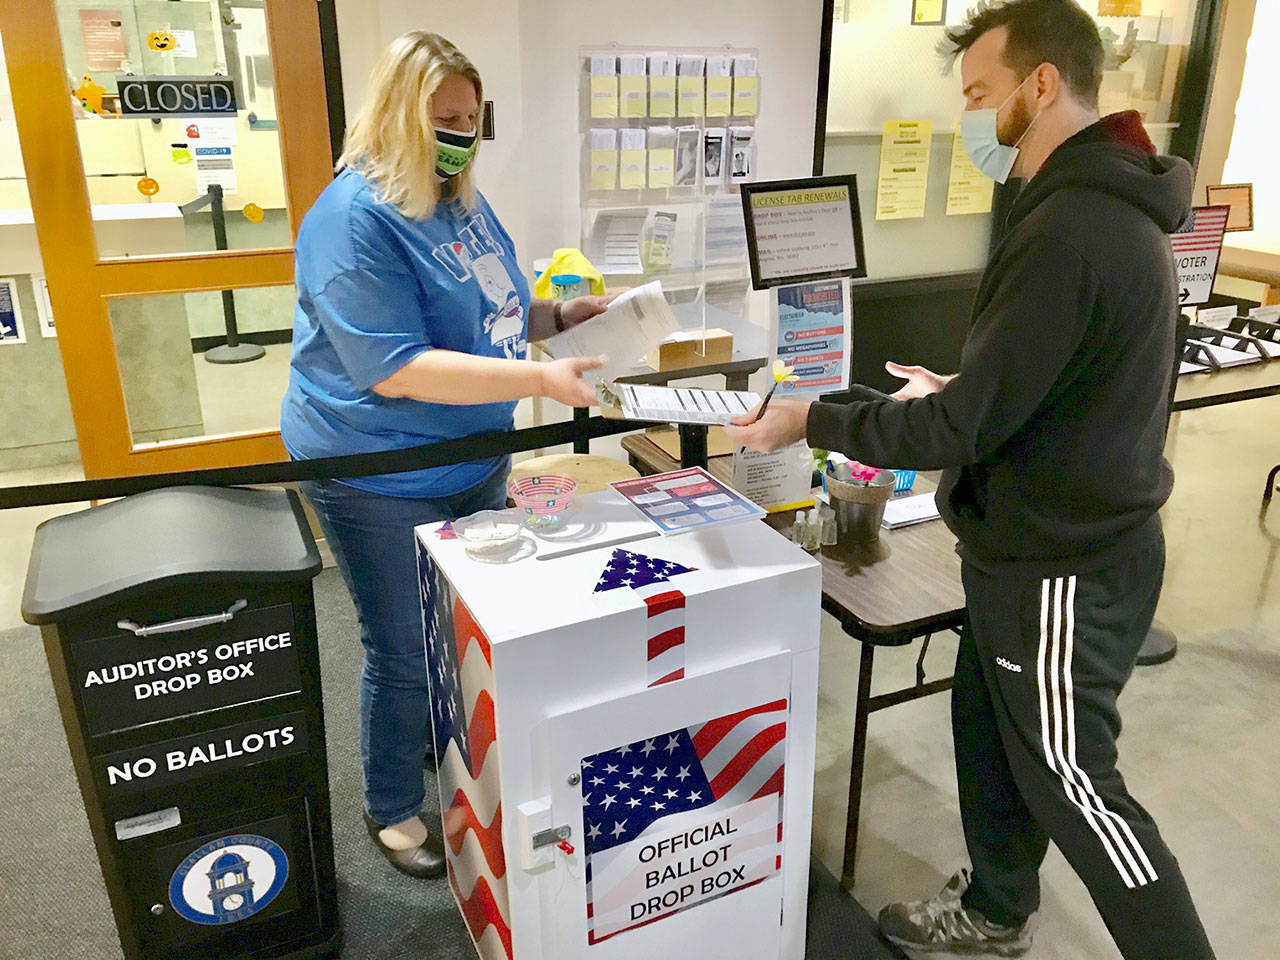 Angi Klahn, left, Clallam County Auditor’s Office accountant, helped process voter registration Friday, Oct. 30, 2020, for Seth Russell, formerly of Santa Cruz, Calif., who recently moved to Port Angeles with his partner and her brother. (Paul Gottlieb/Peninsula Daily News)